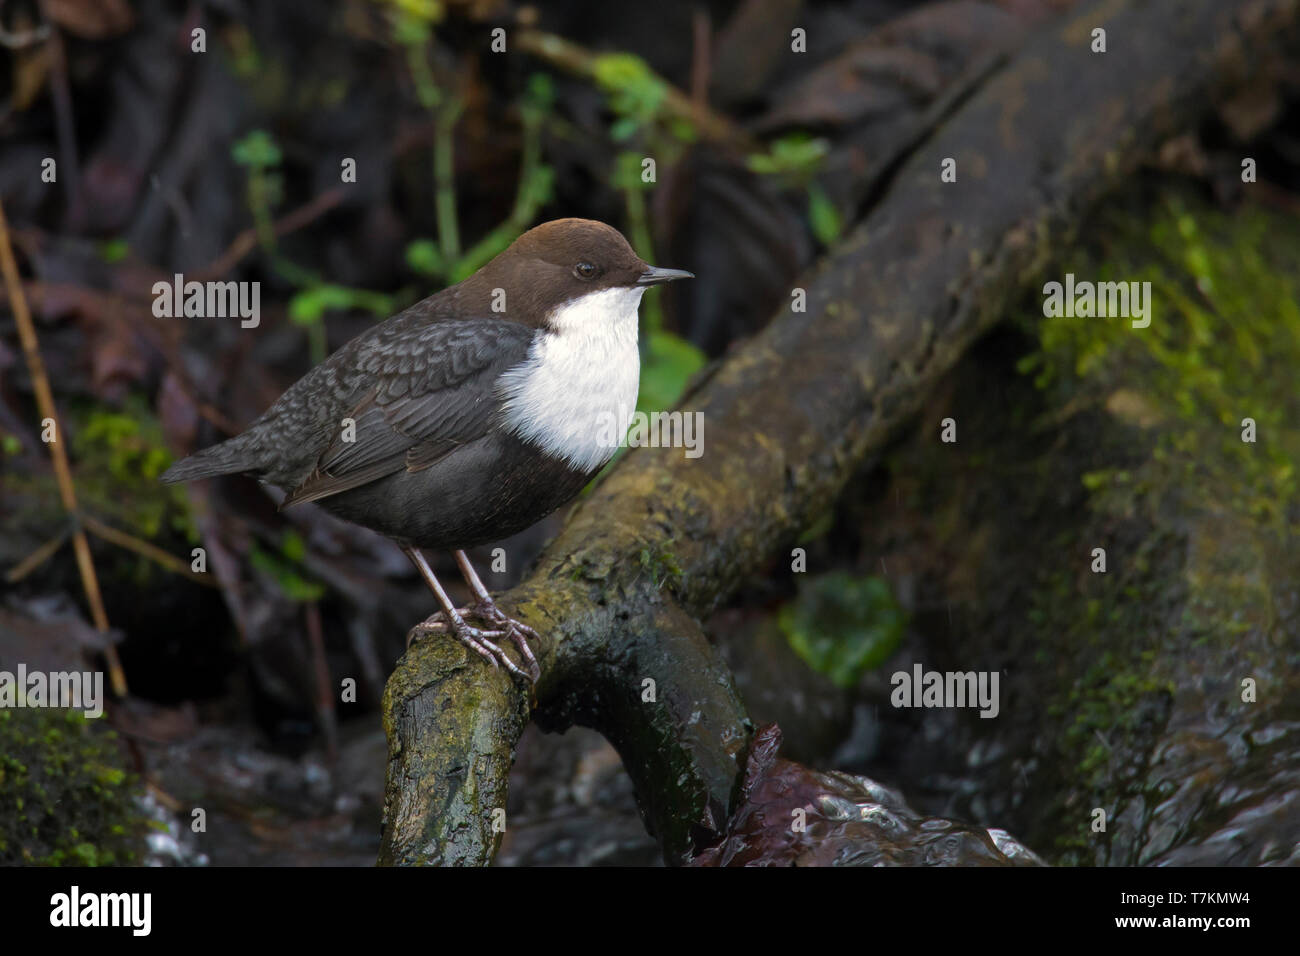 White-throated dipper / European dipper (Cinclus cinclus aquaticus) perched on tree root over stream Stock Photo